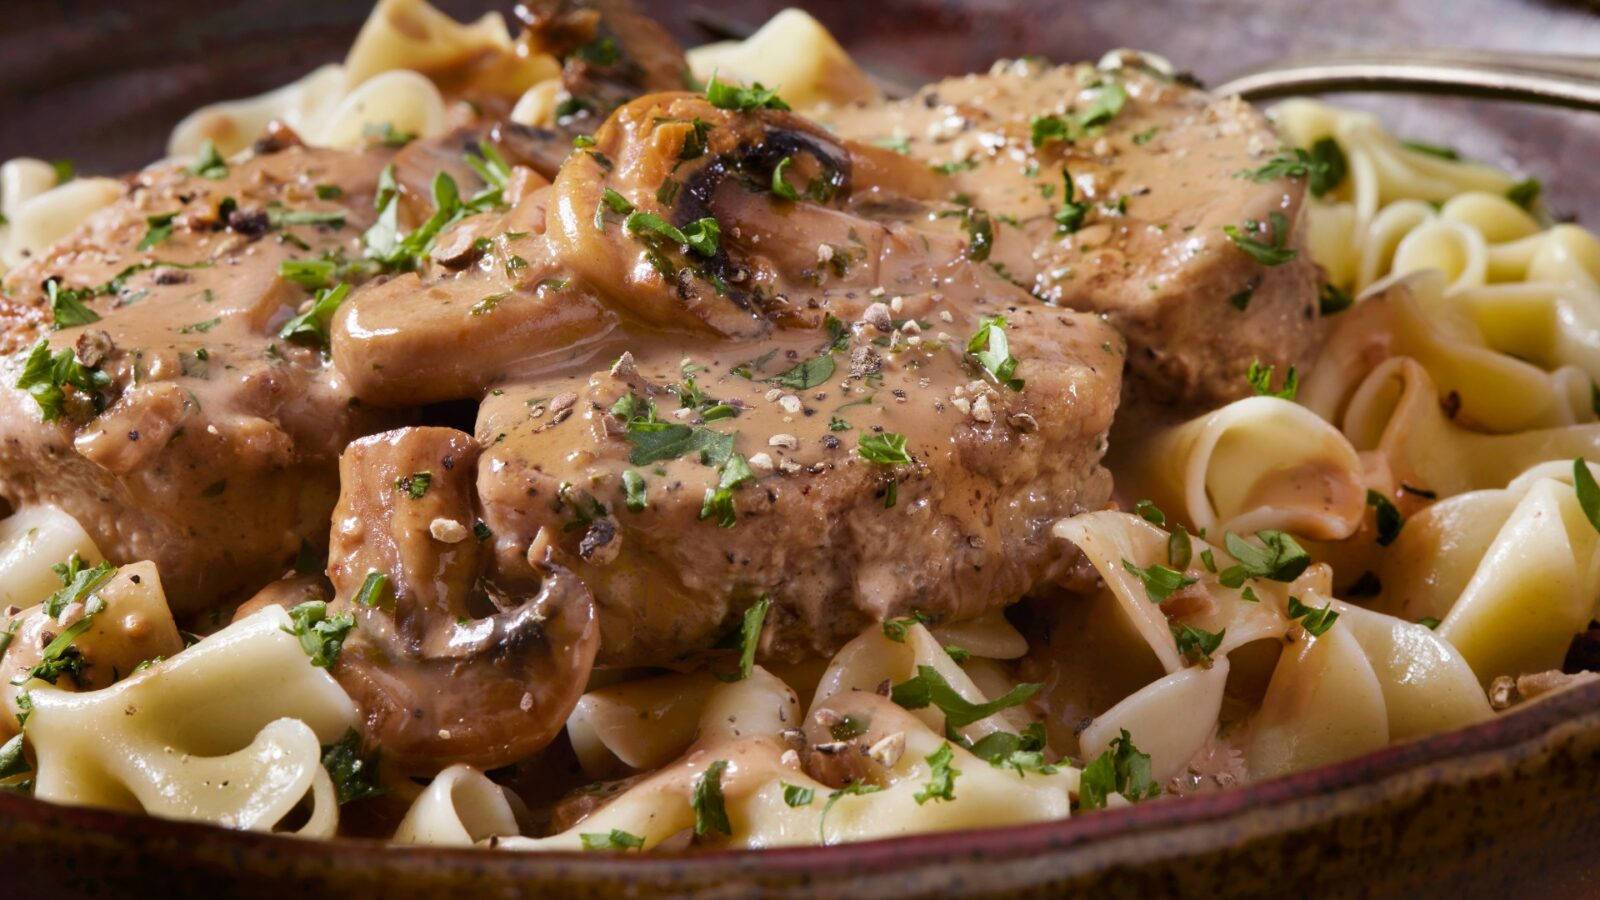 Mushrooms And Pasta With Beef Stroganoff Wallpaper